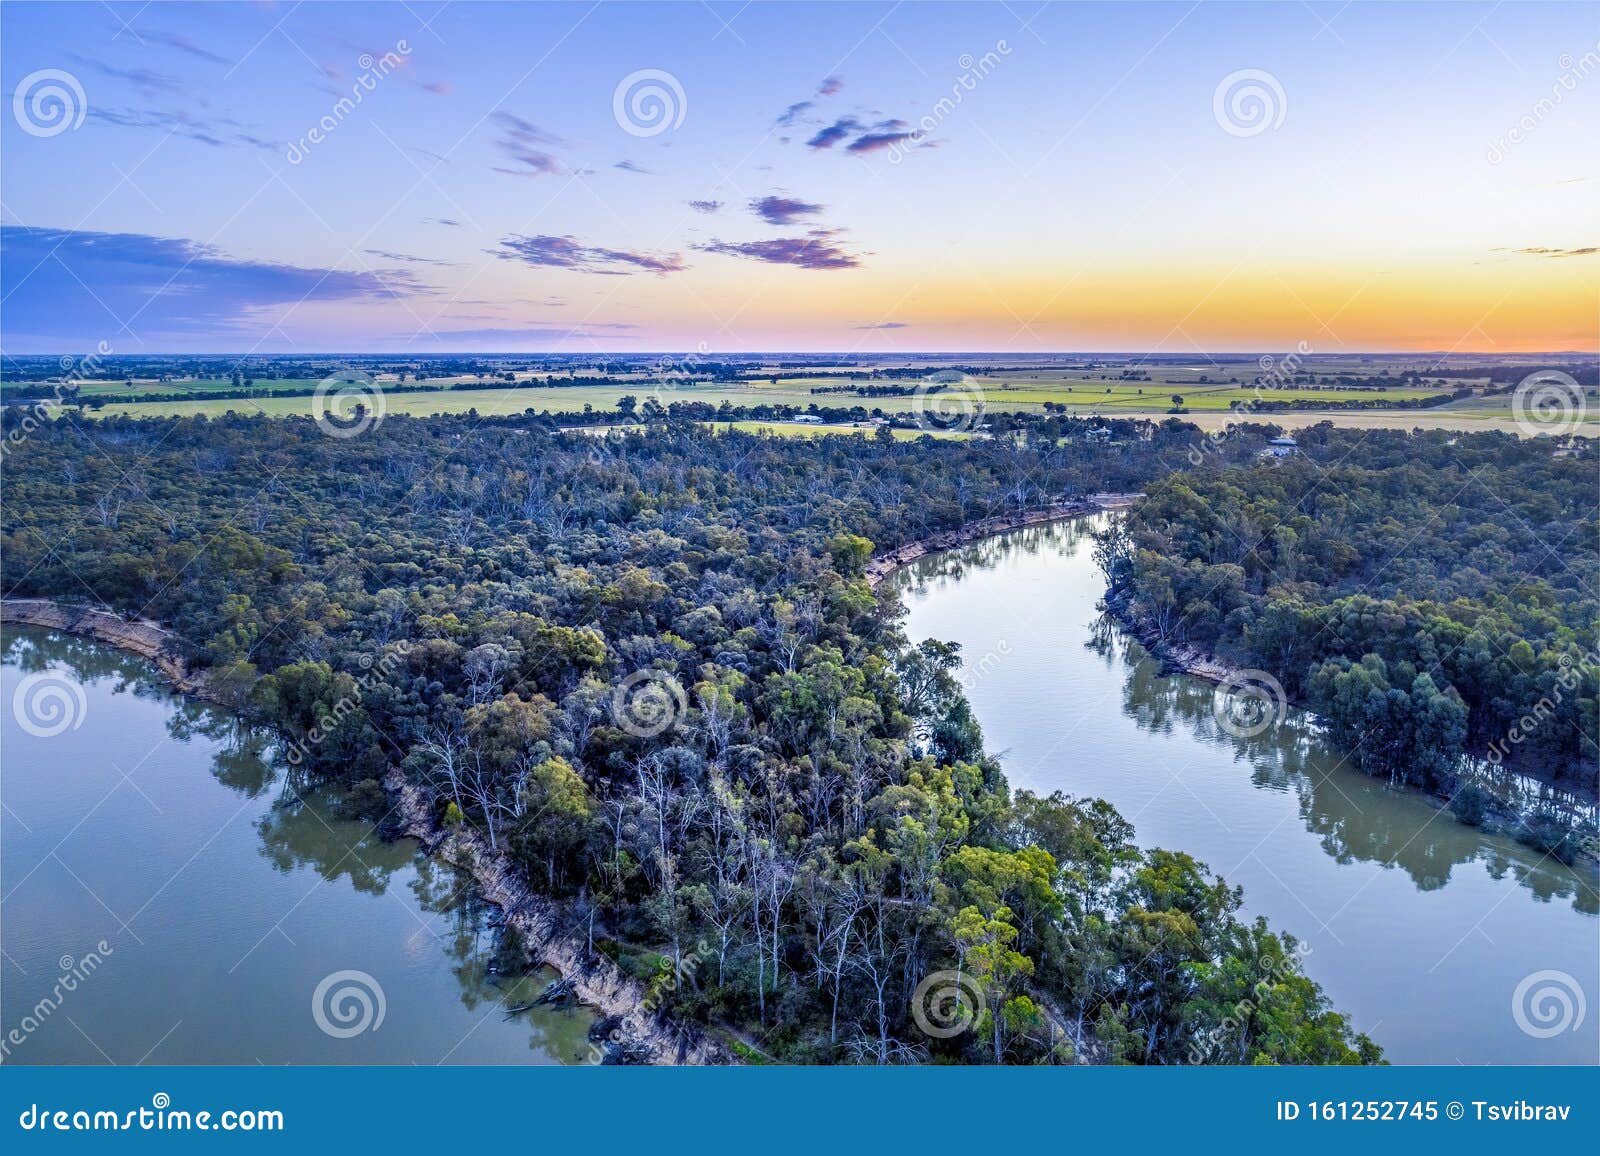 murray river bends among trees at dusk.